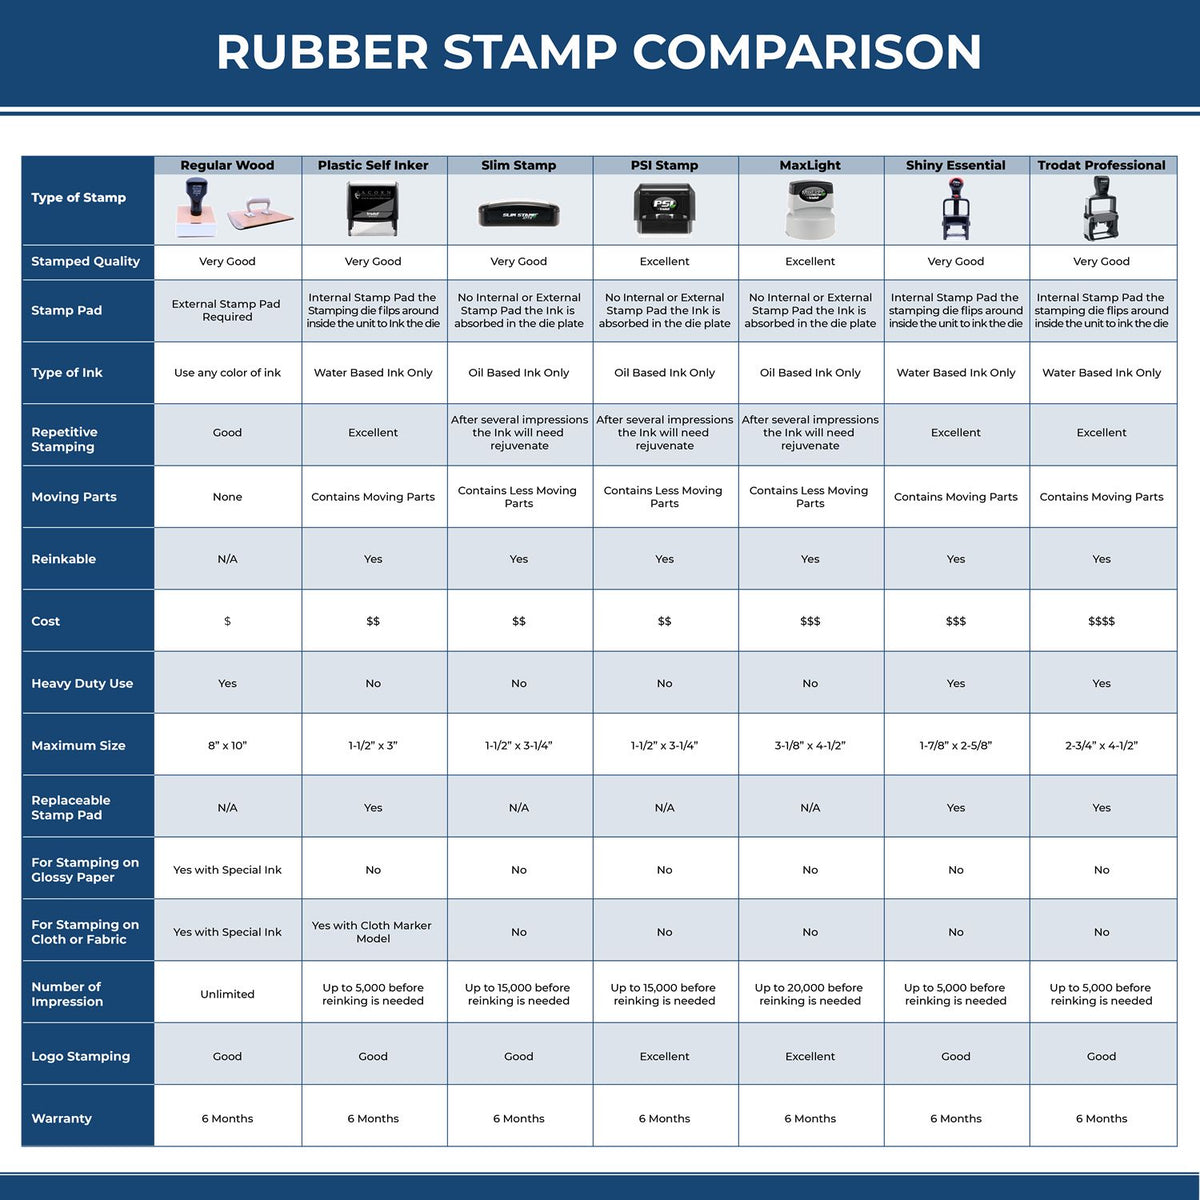 Large Self-Inking Times Faxed with Line Stamp 4870S Rubber Stamp Comparison